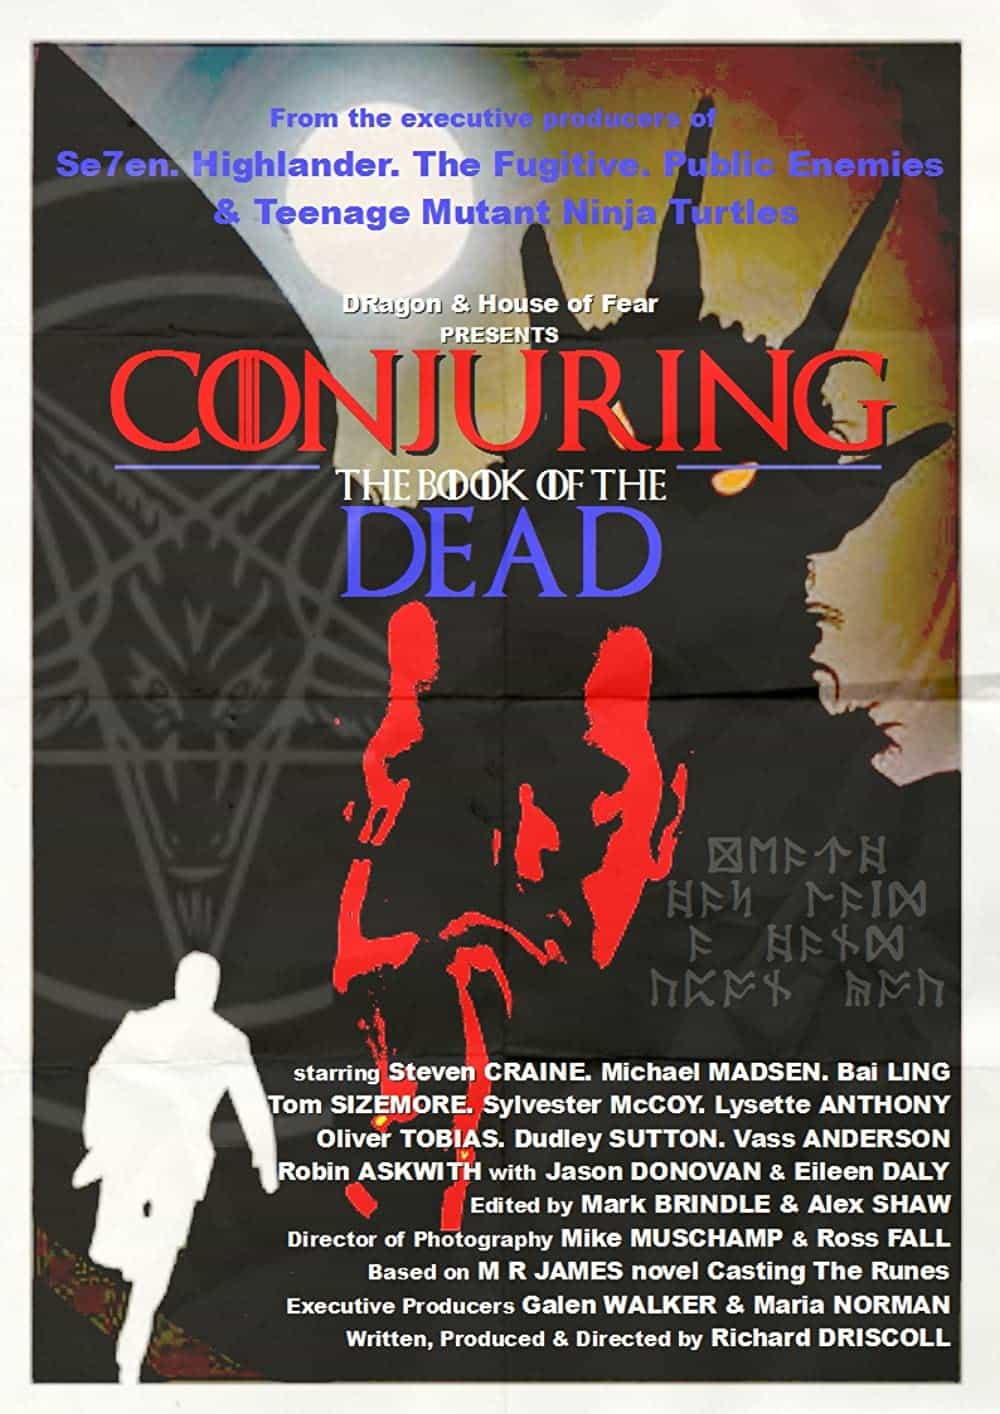 Conjuring: The Book of the Dead